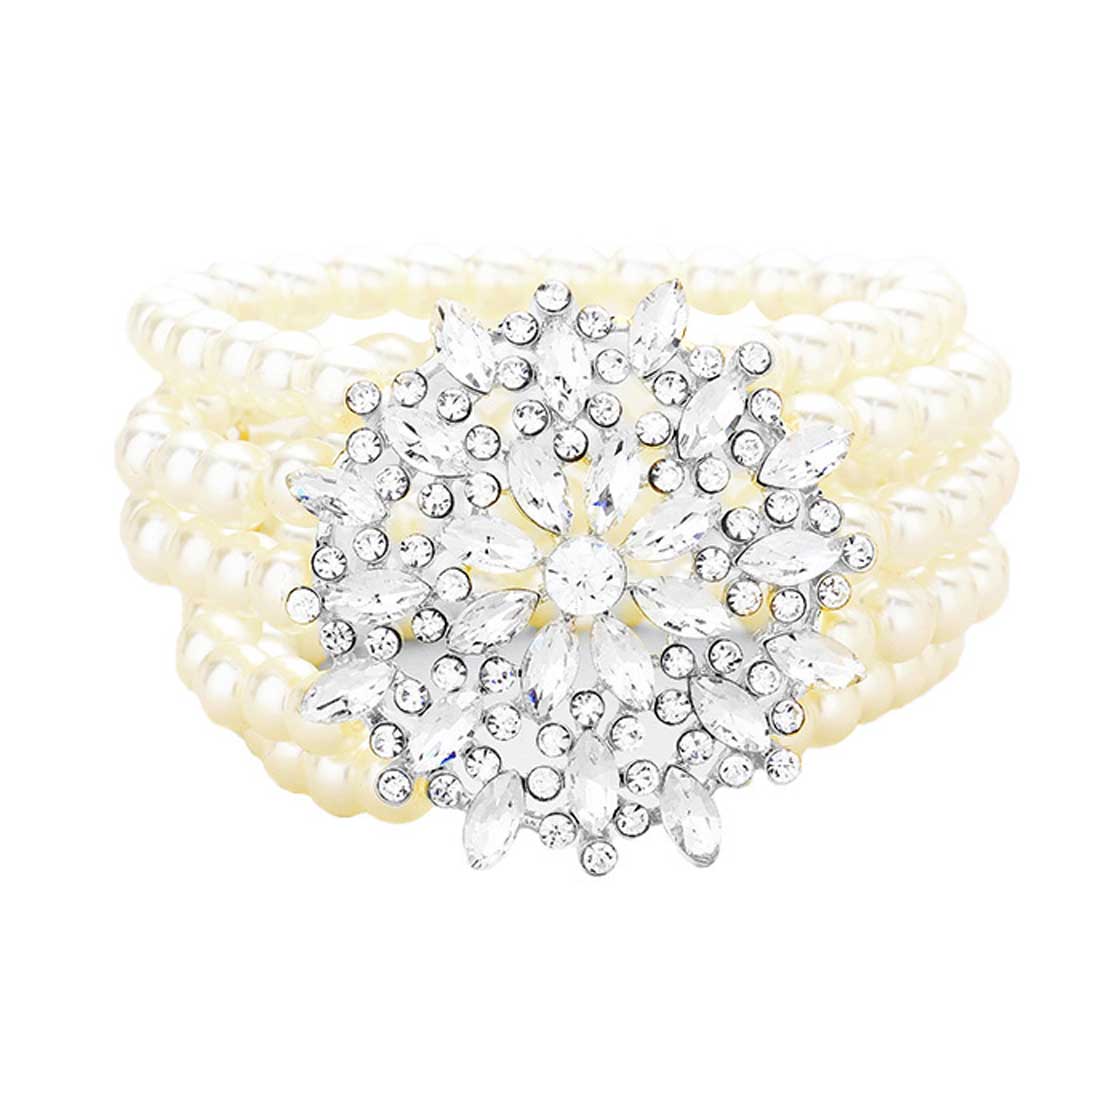 White Multi Strand Pearl Crystal Flower Accented Stretch Bracelet. Get ready with this Stretch Bracelet, put on a pop of color to complete your ensemble. Perfect for adding just the right amount of shimmer & shine and a touch of class to special events. Perfect Birthday Gift, Anniversary Gift, Mother's Day Gift, Thank you Gift.